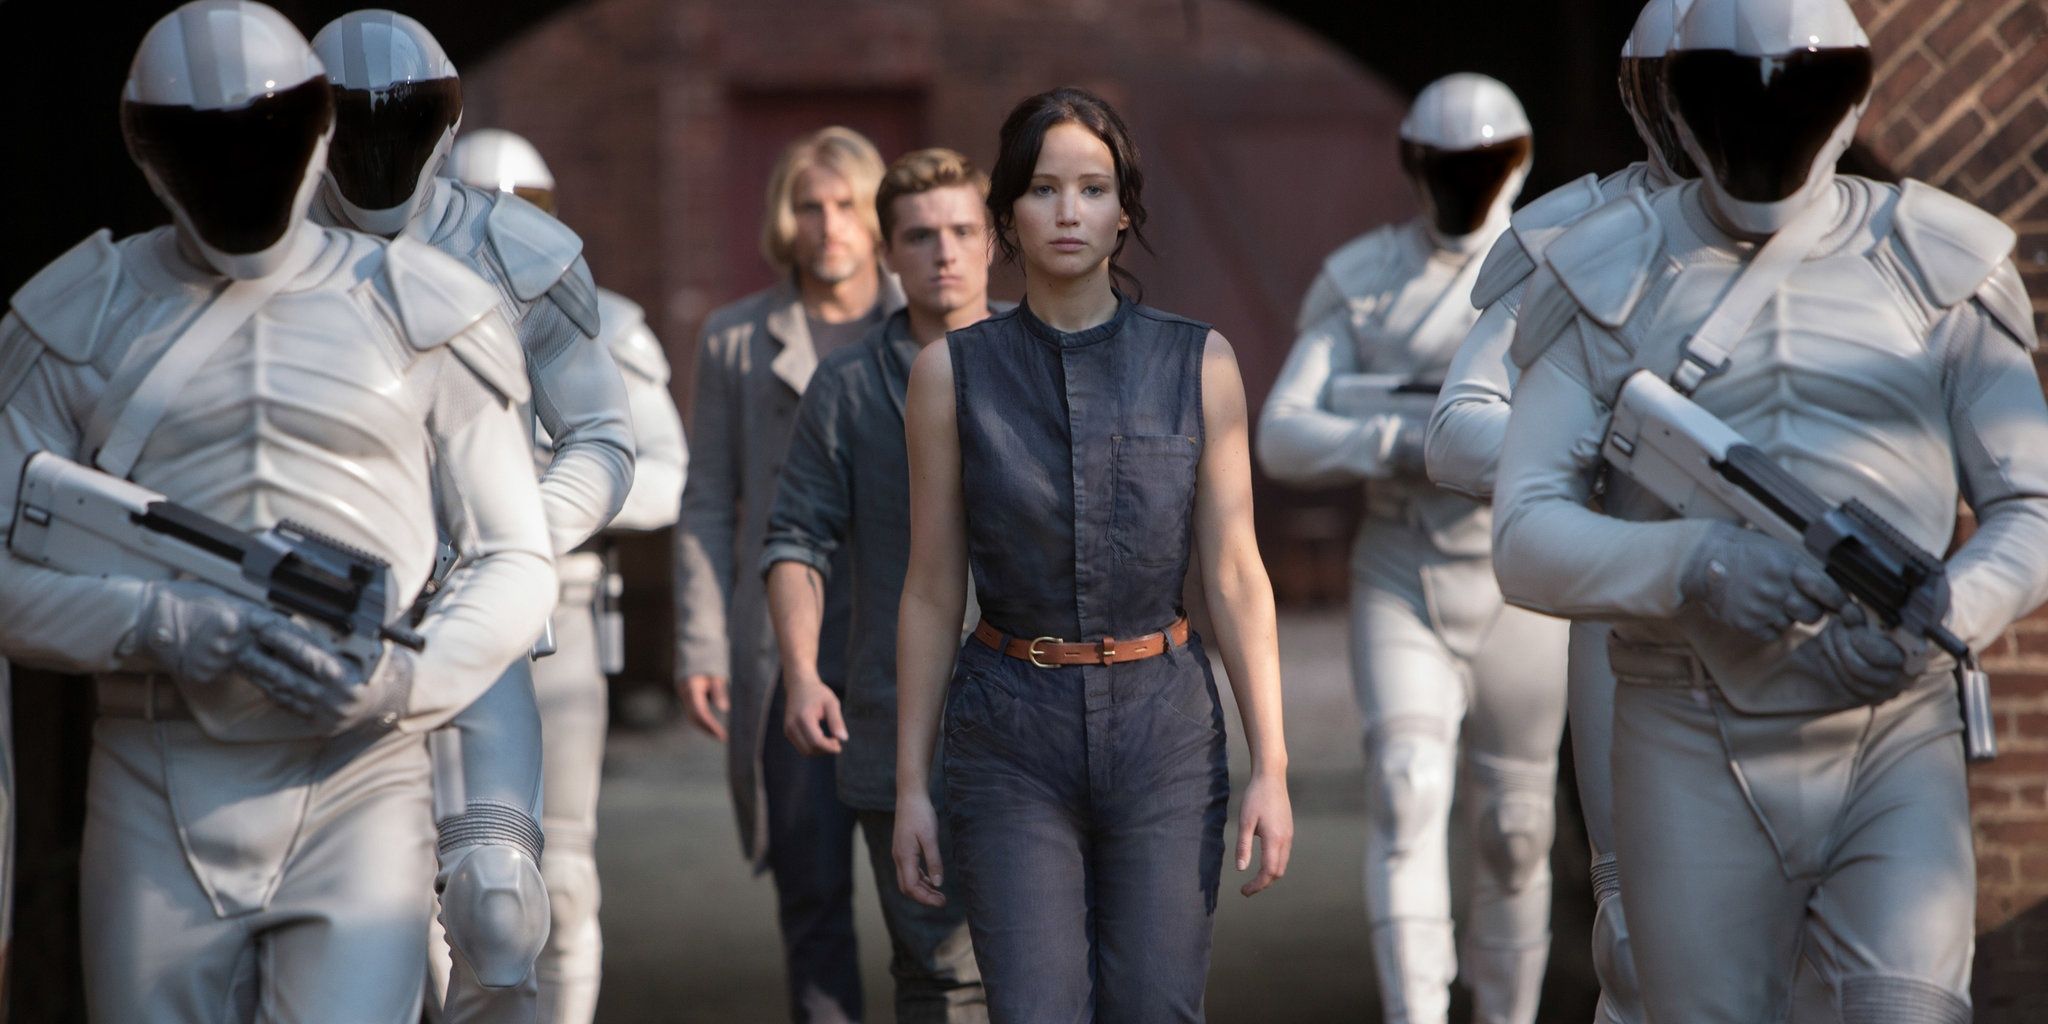 Katniss Everdeen walking, flanked by soldiers 